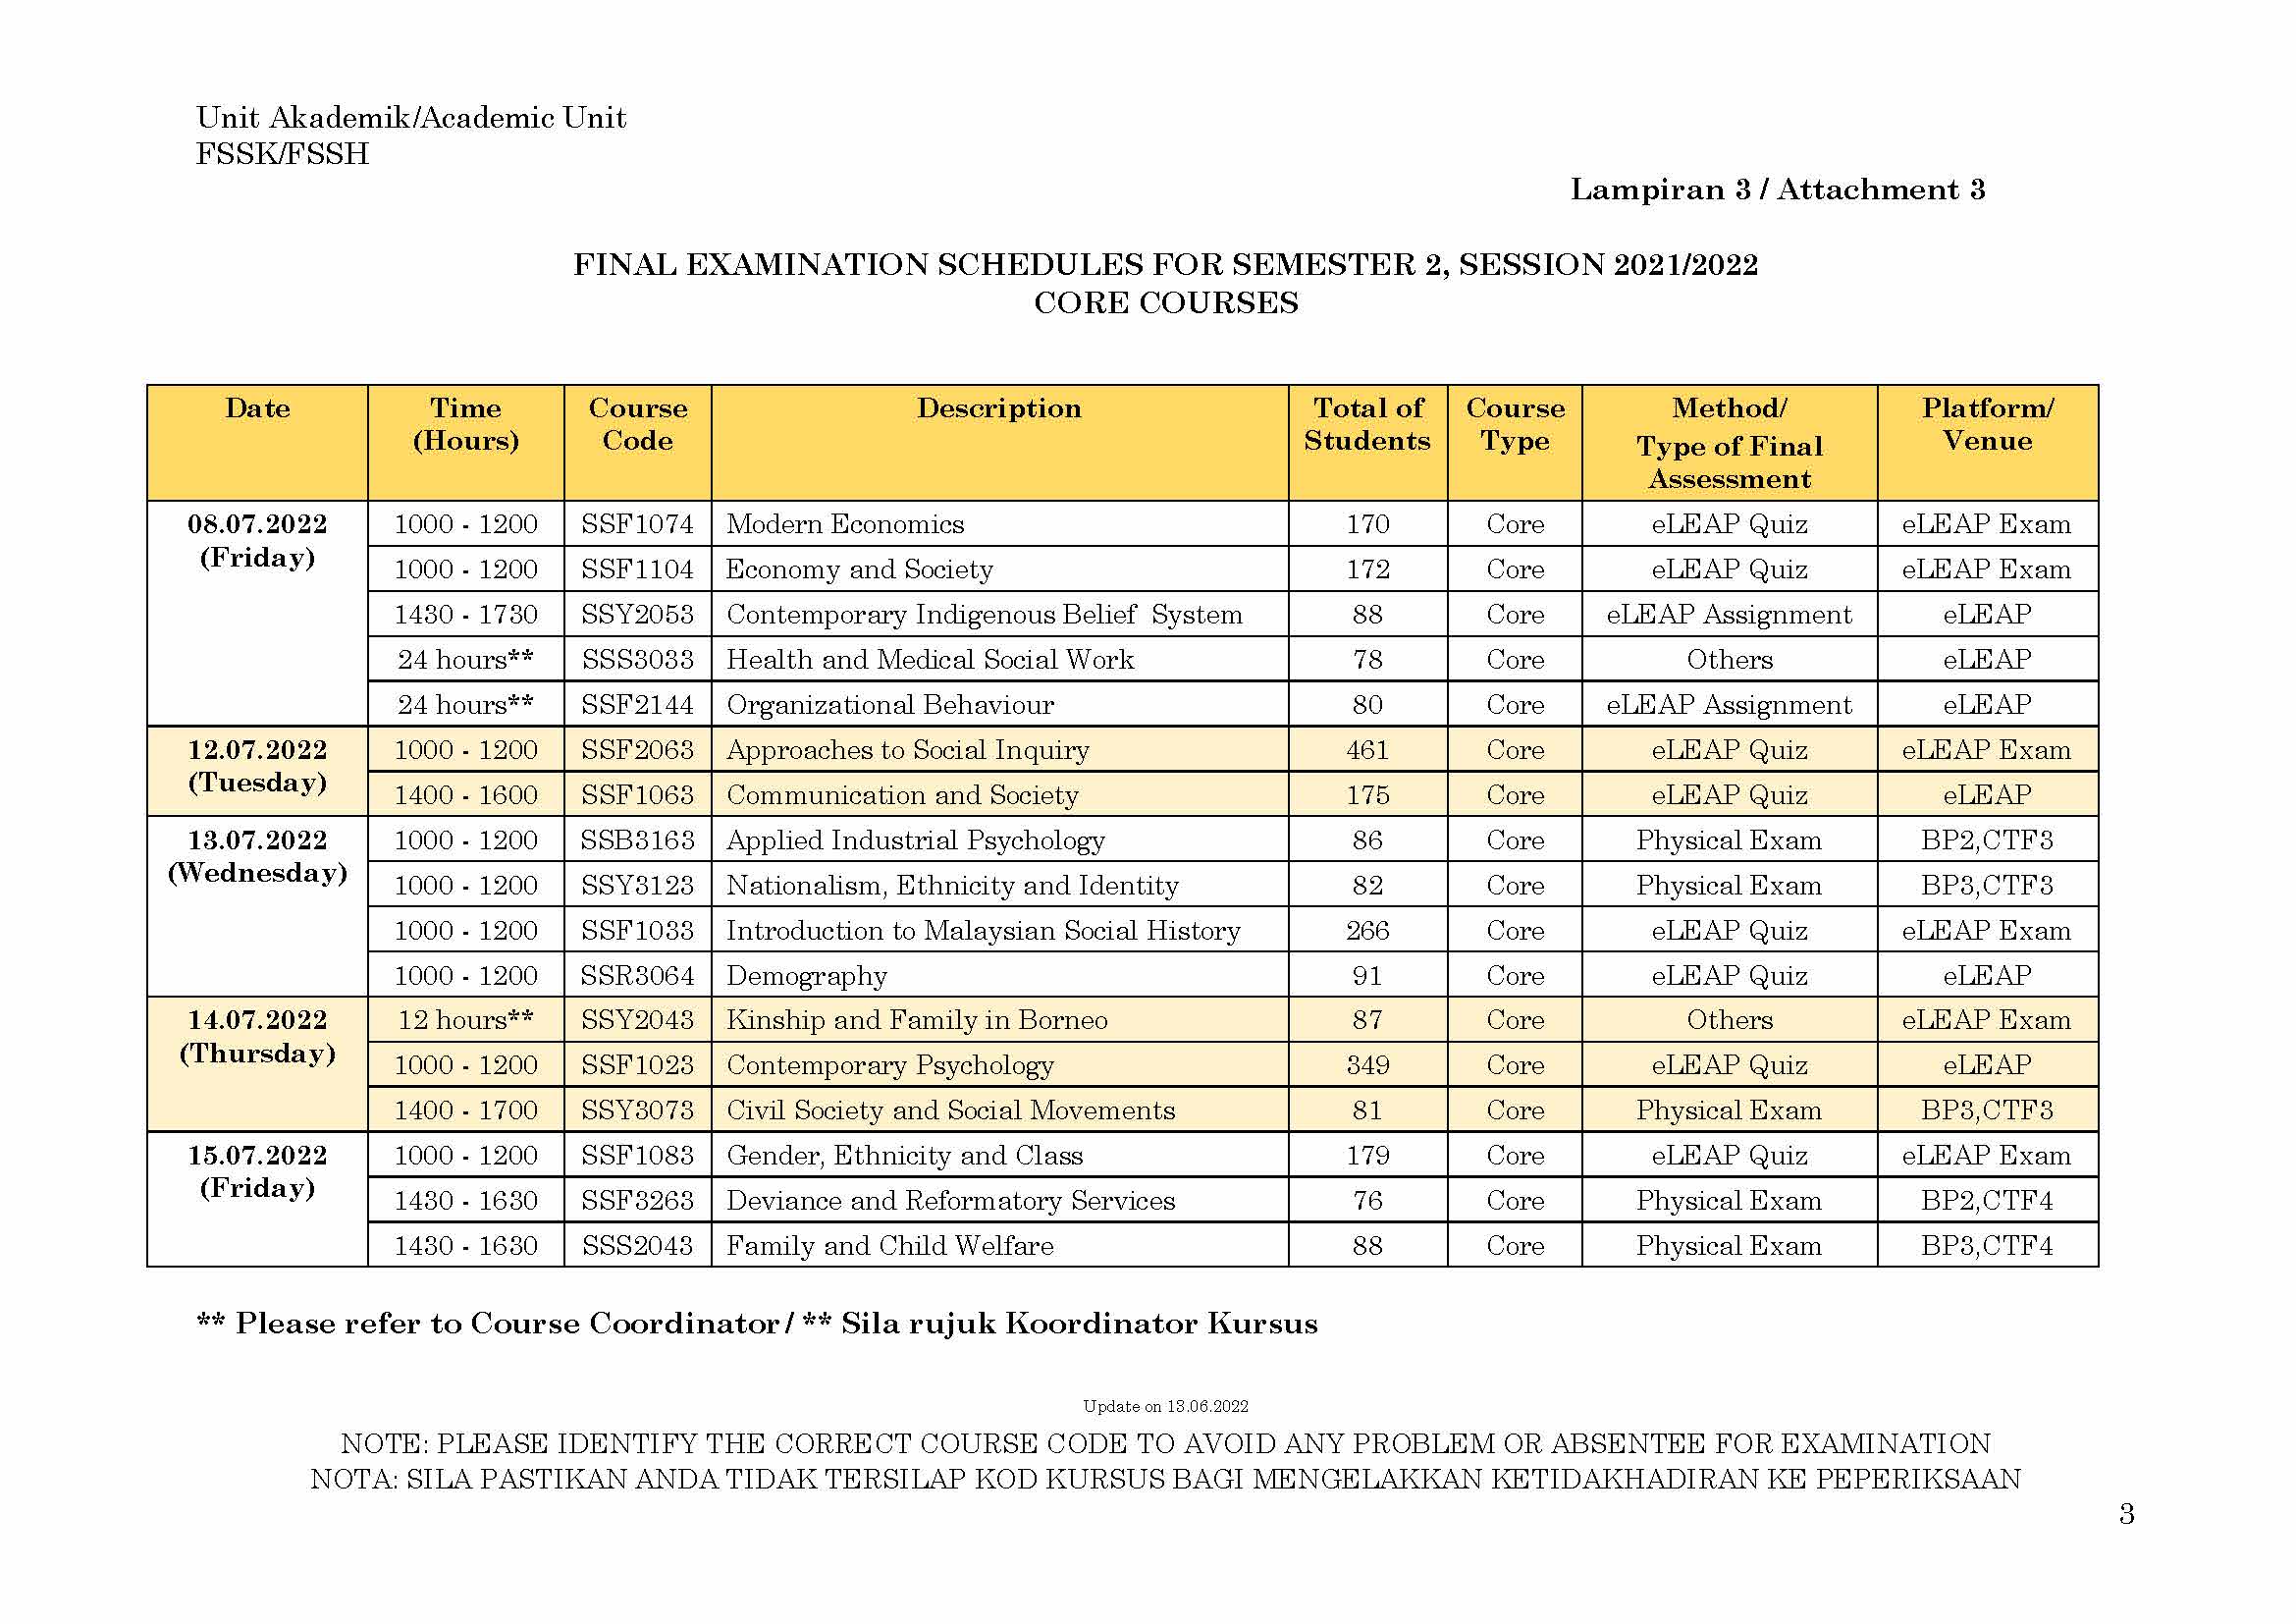 FINAL EXAMINATION SCHEDULES FOR SEMESTER 2 SESSION 2021 2022 Page 4